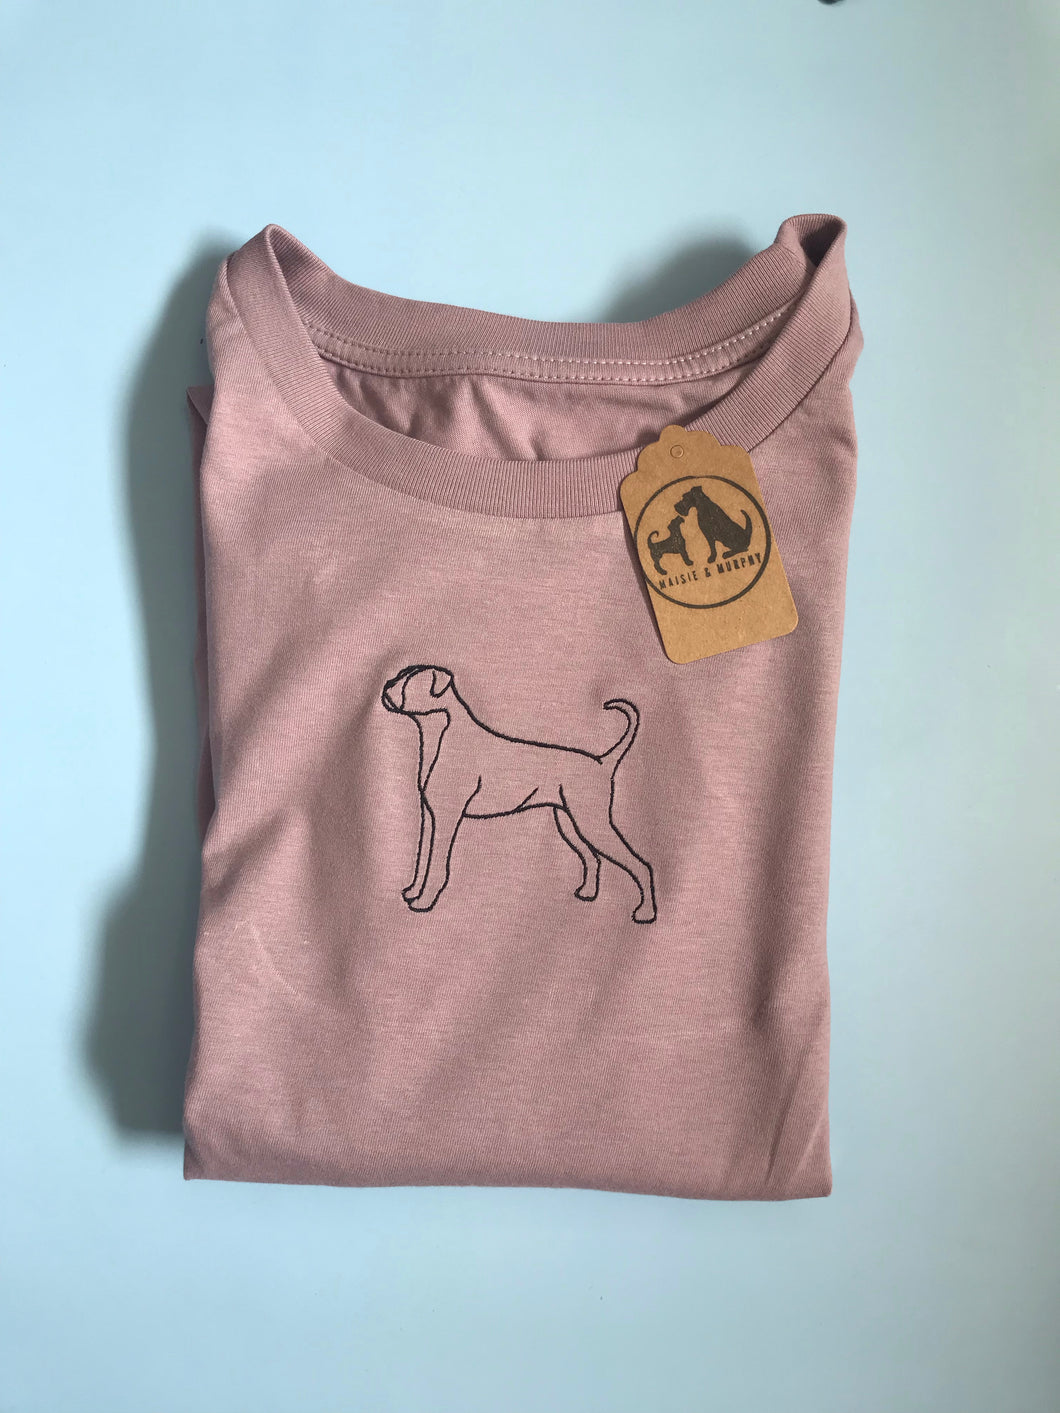 Boxer Dog T-shirt - Gifts for Boxer Lovers and Owners